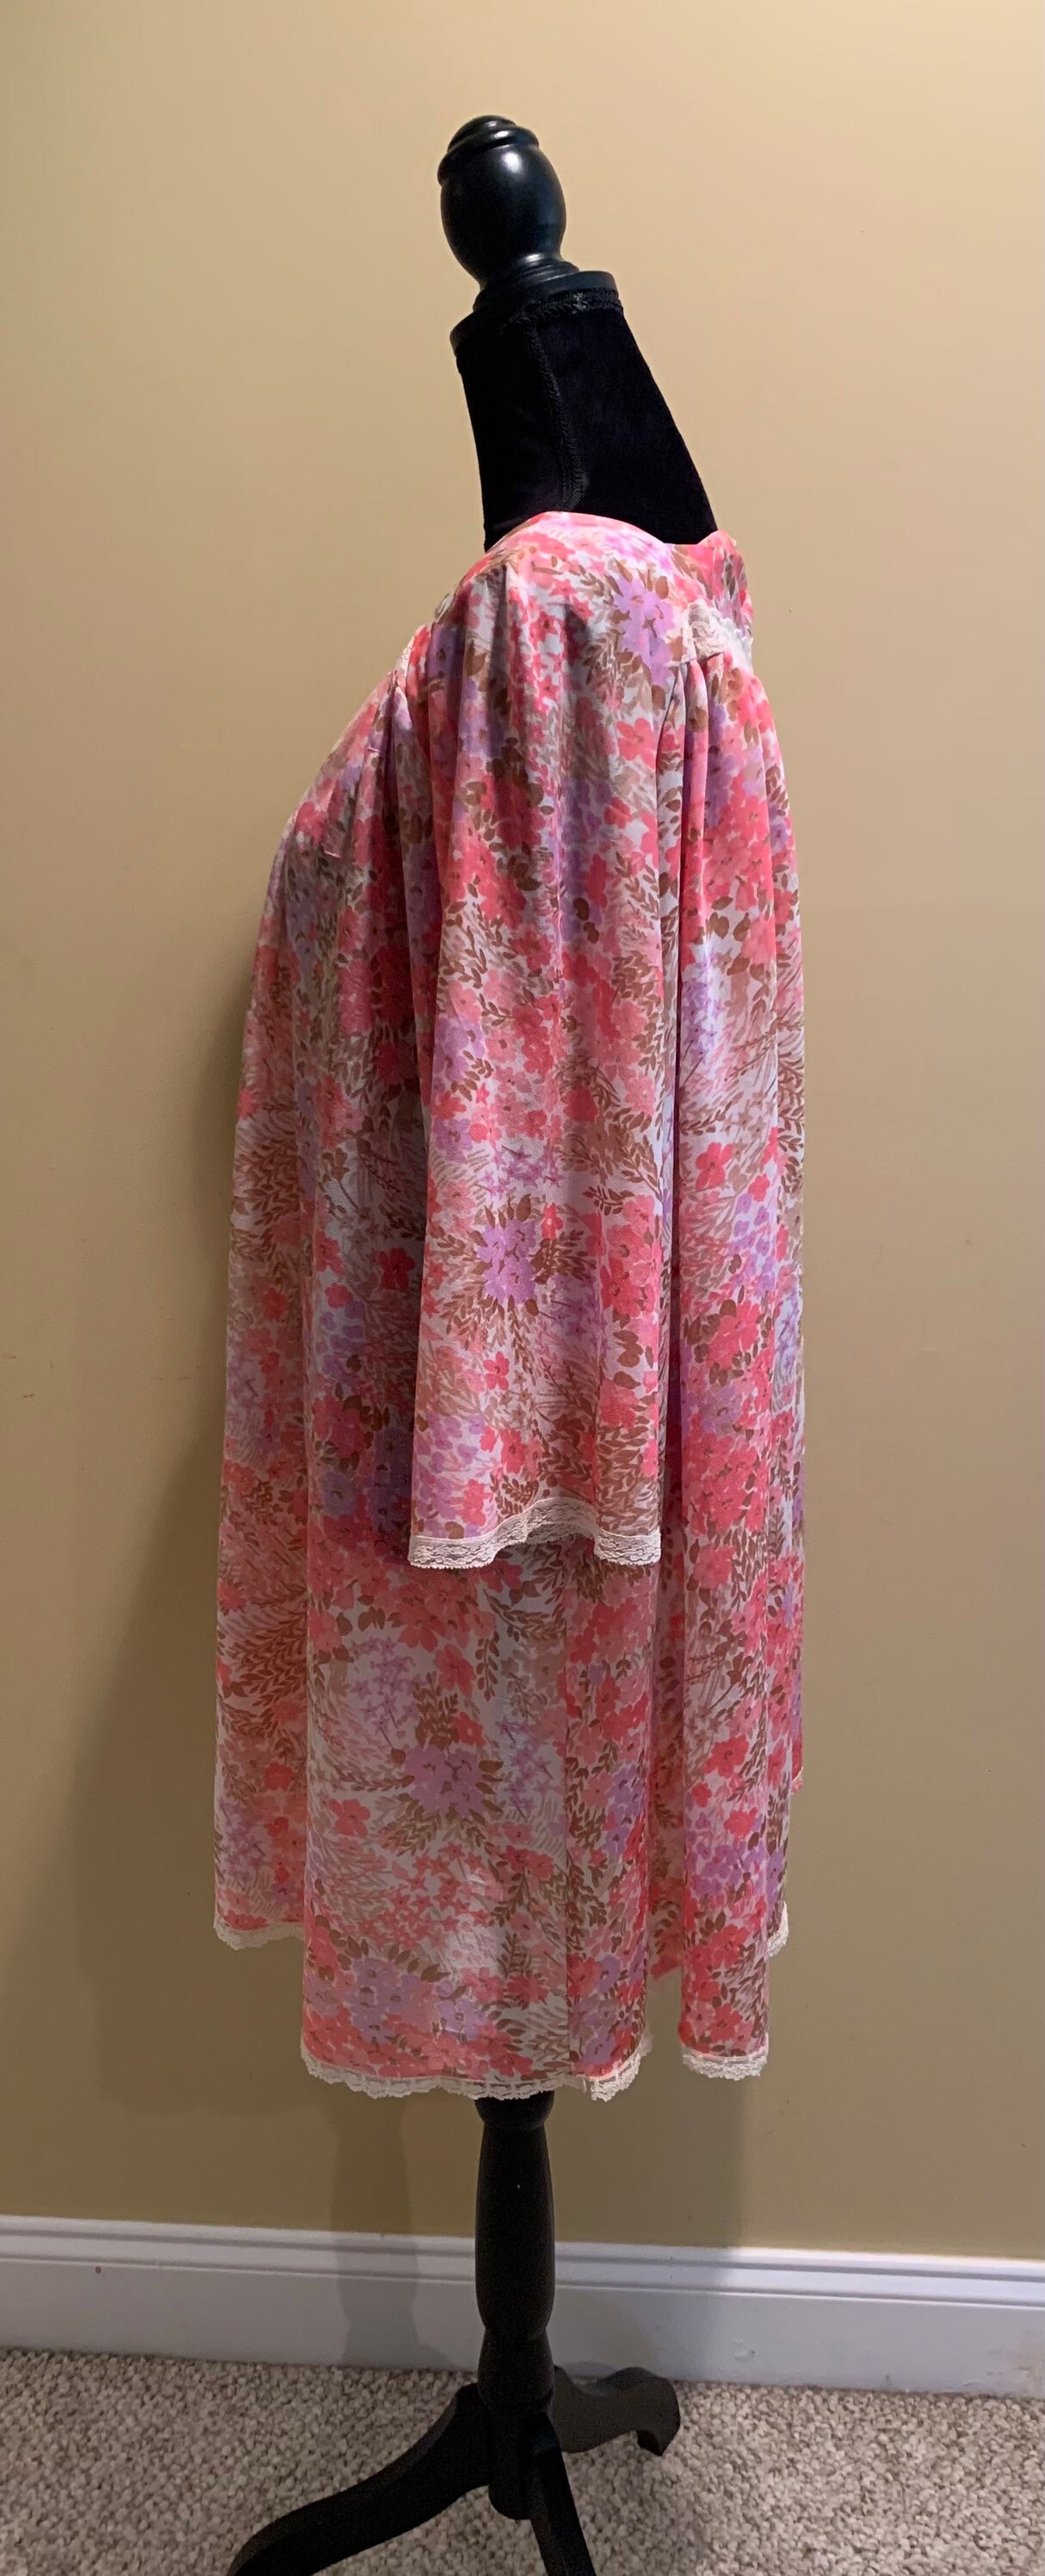 Handmade vintage nylon chiffon floral nightgown cover up | Etsy